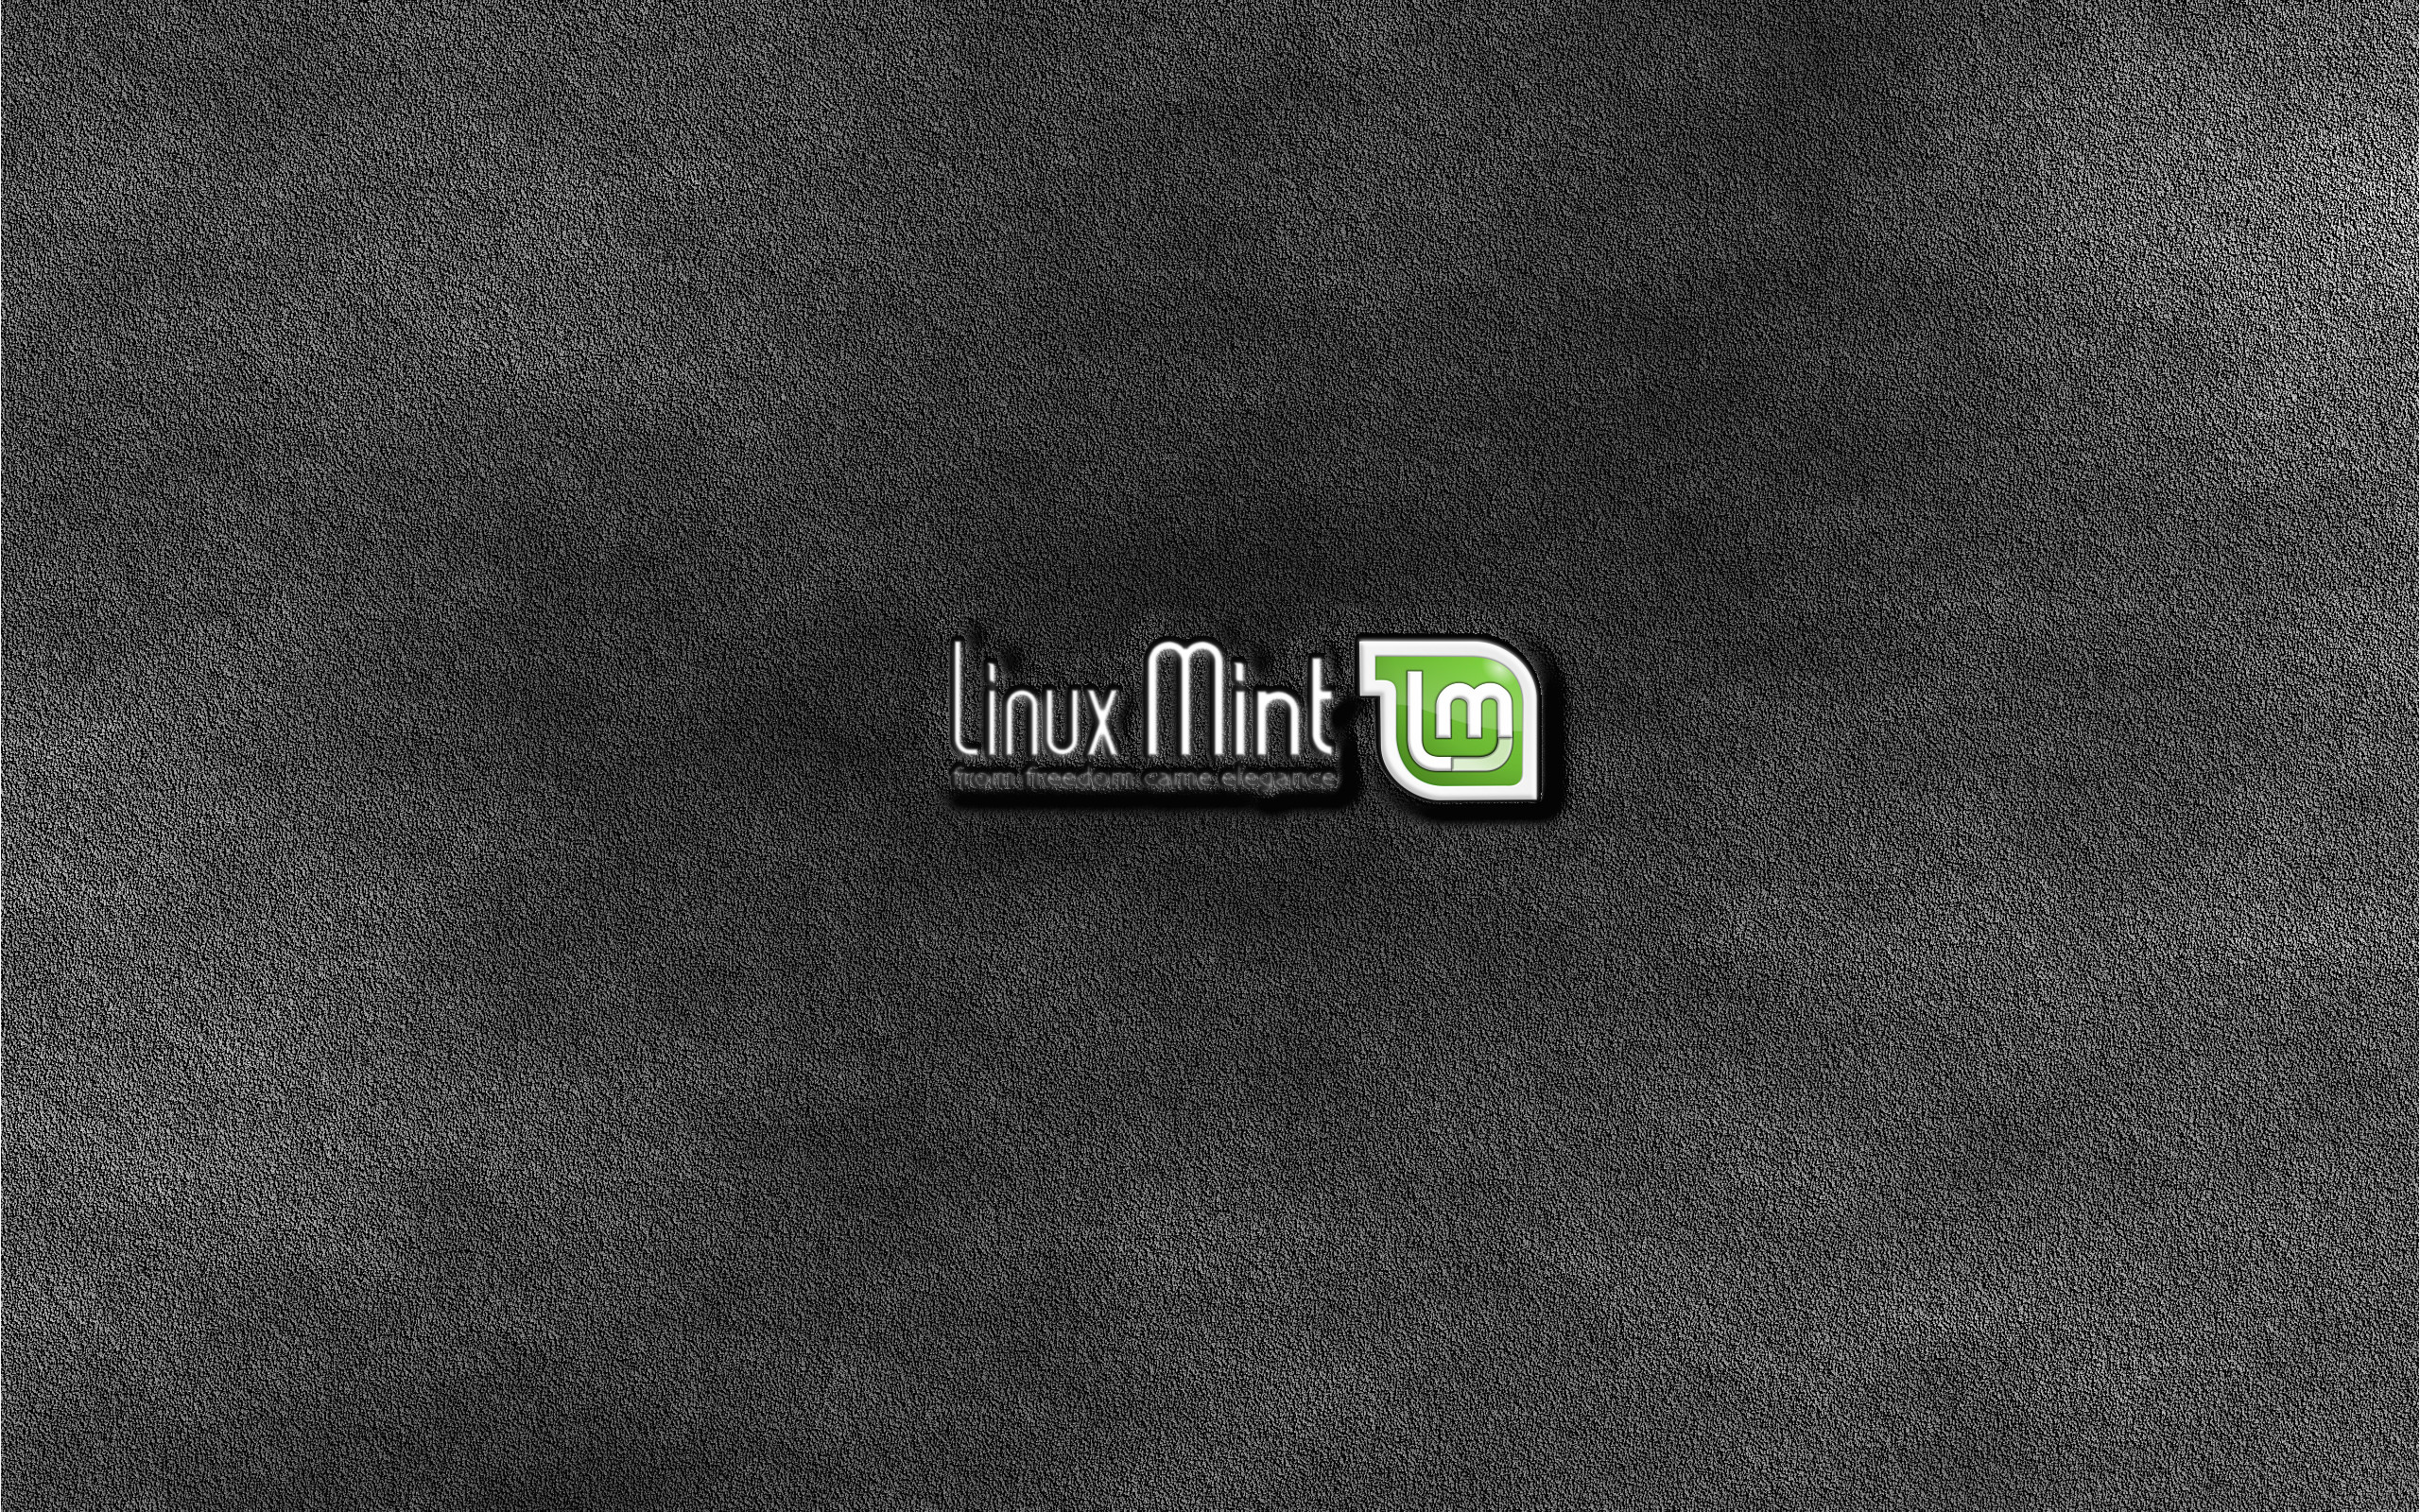 Linux Mint Awesome Wallpapers 2560x1600